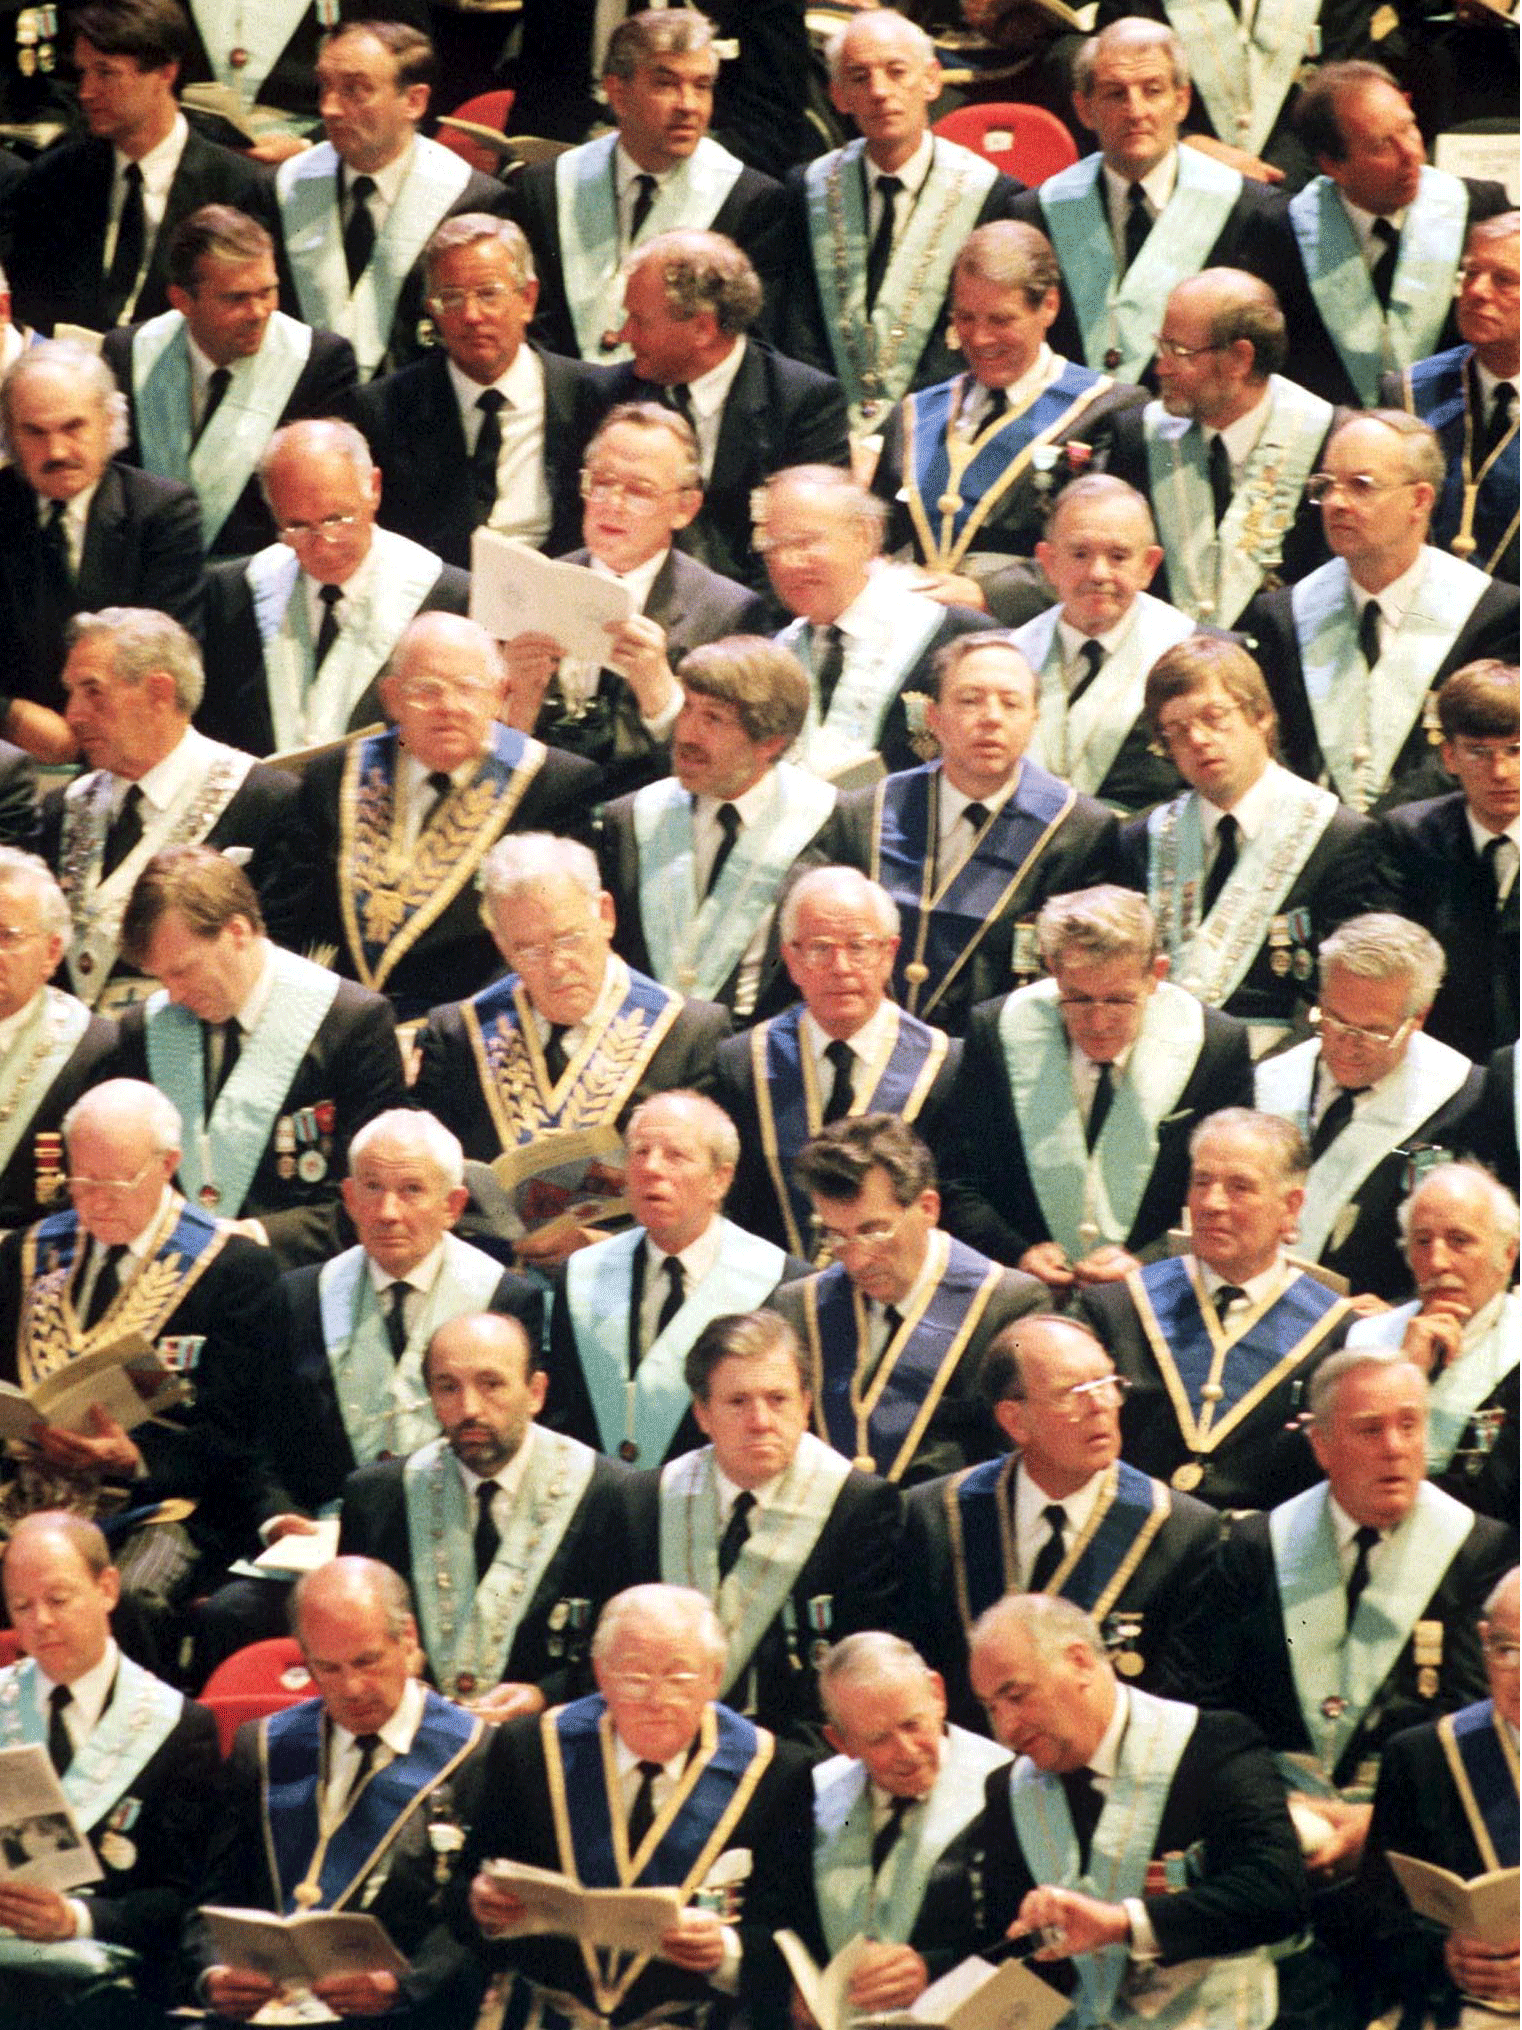 Freemasons at Earls Court, London, celebrate the 275th anniversary of the formation of the first Grand Lodge, in 1992 (Rex/Shutterstock)